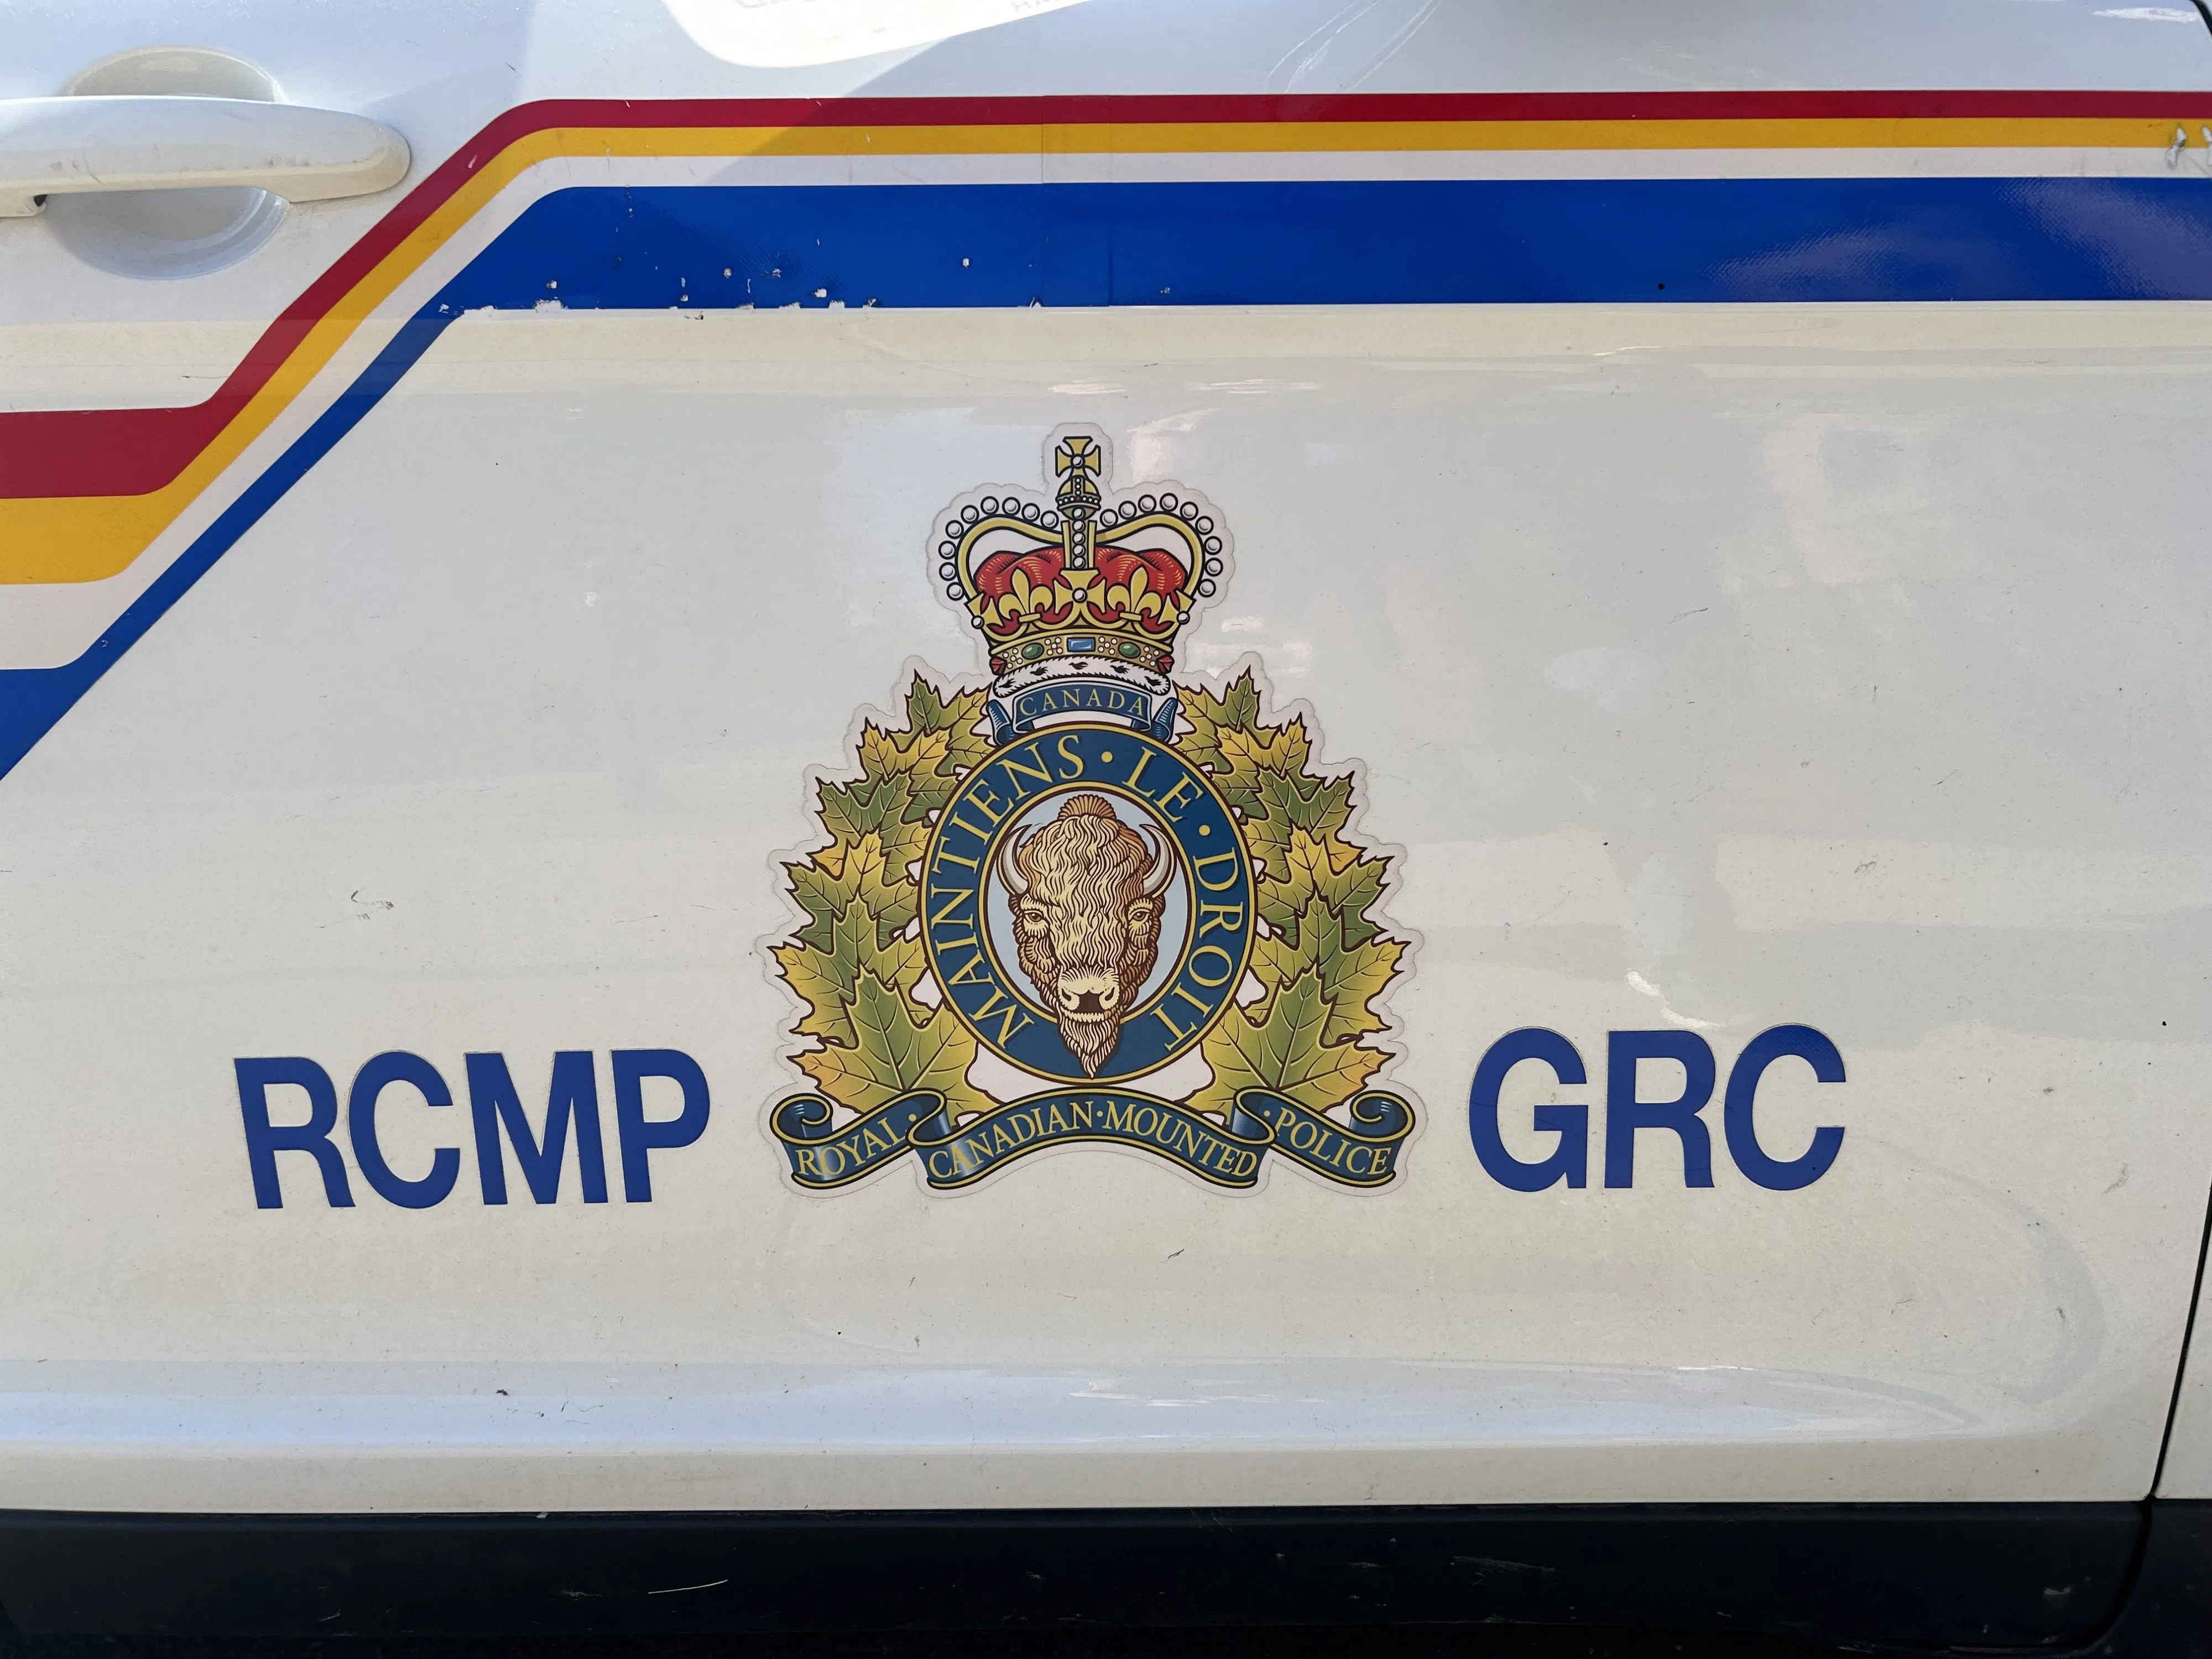 68-year-old Lower Sackville cyclist hit by car: RCMP